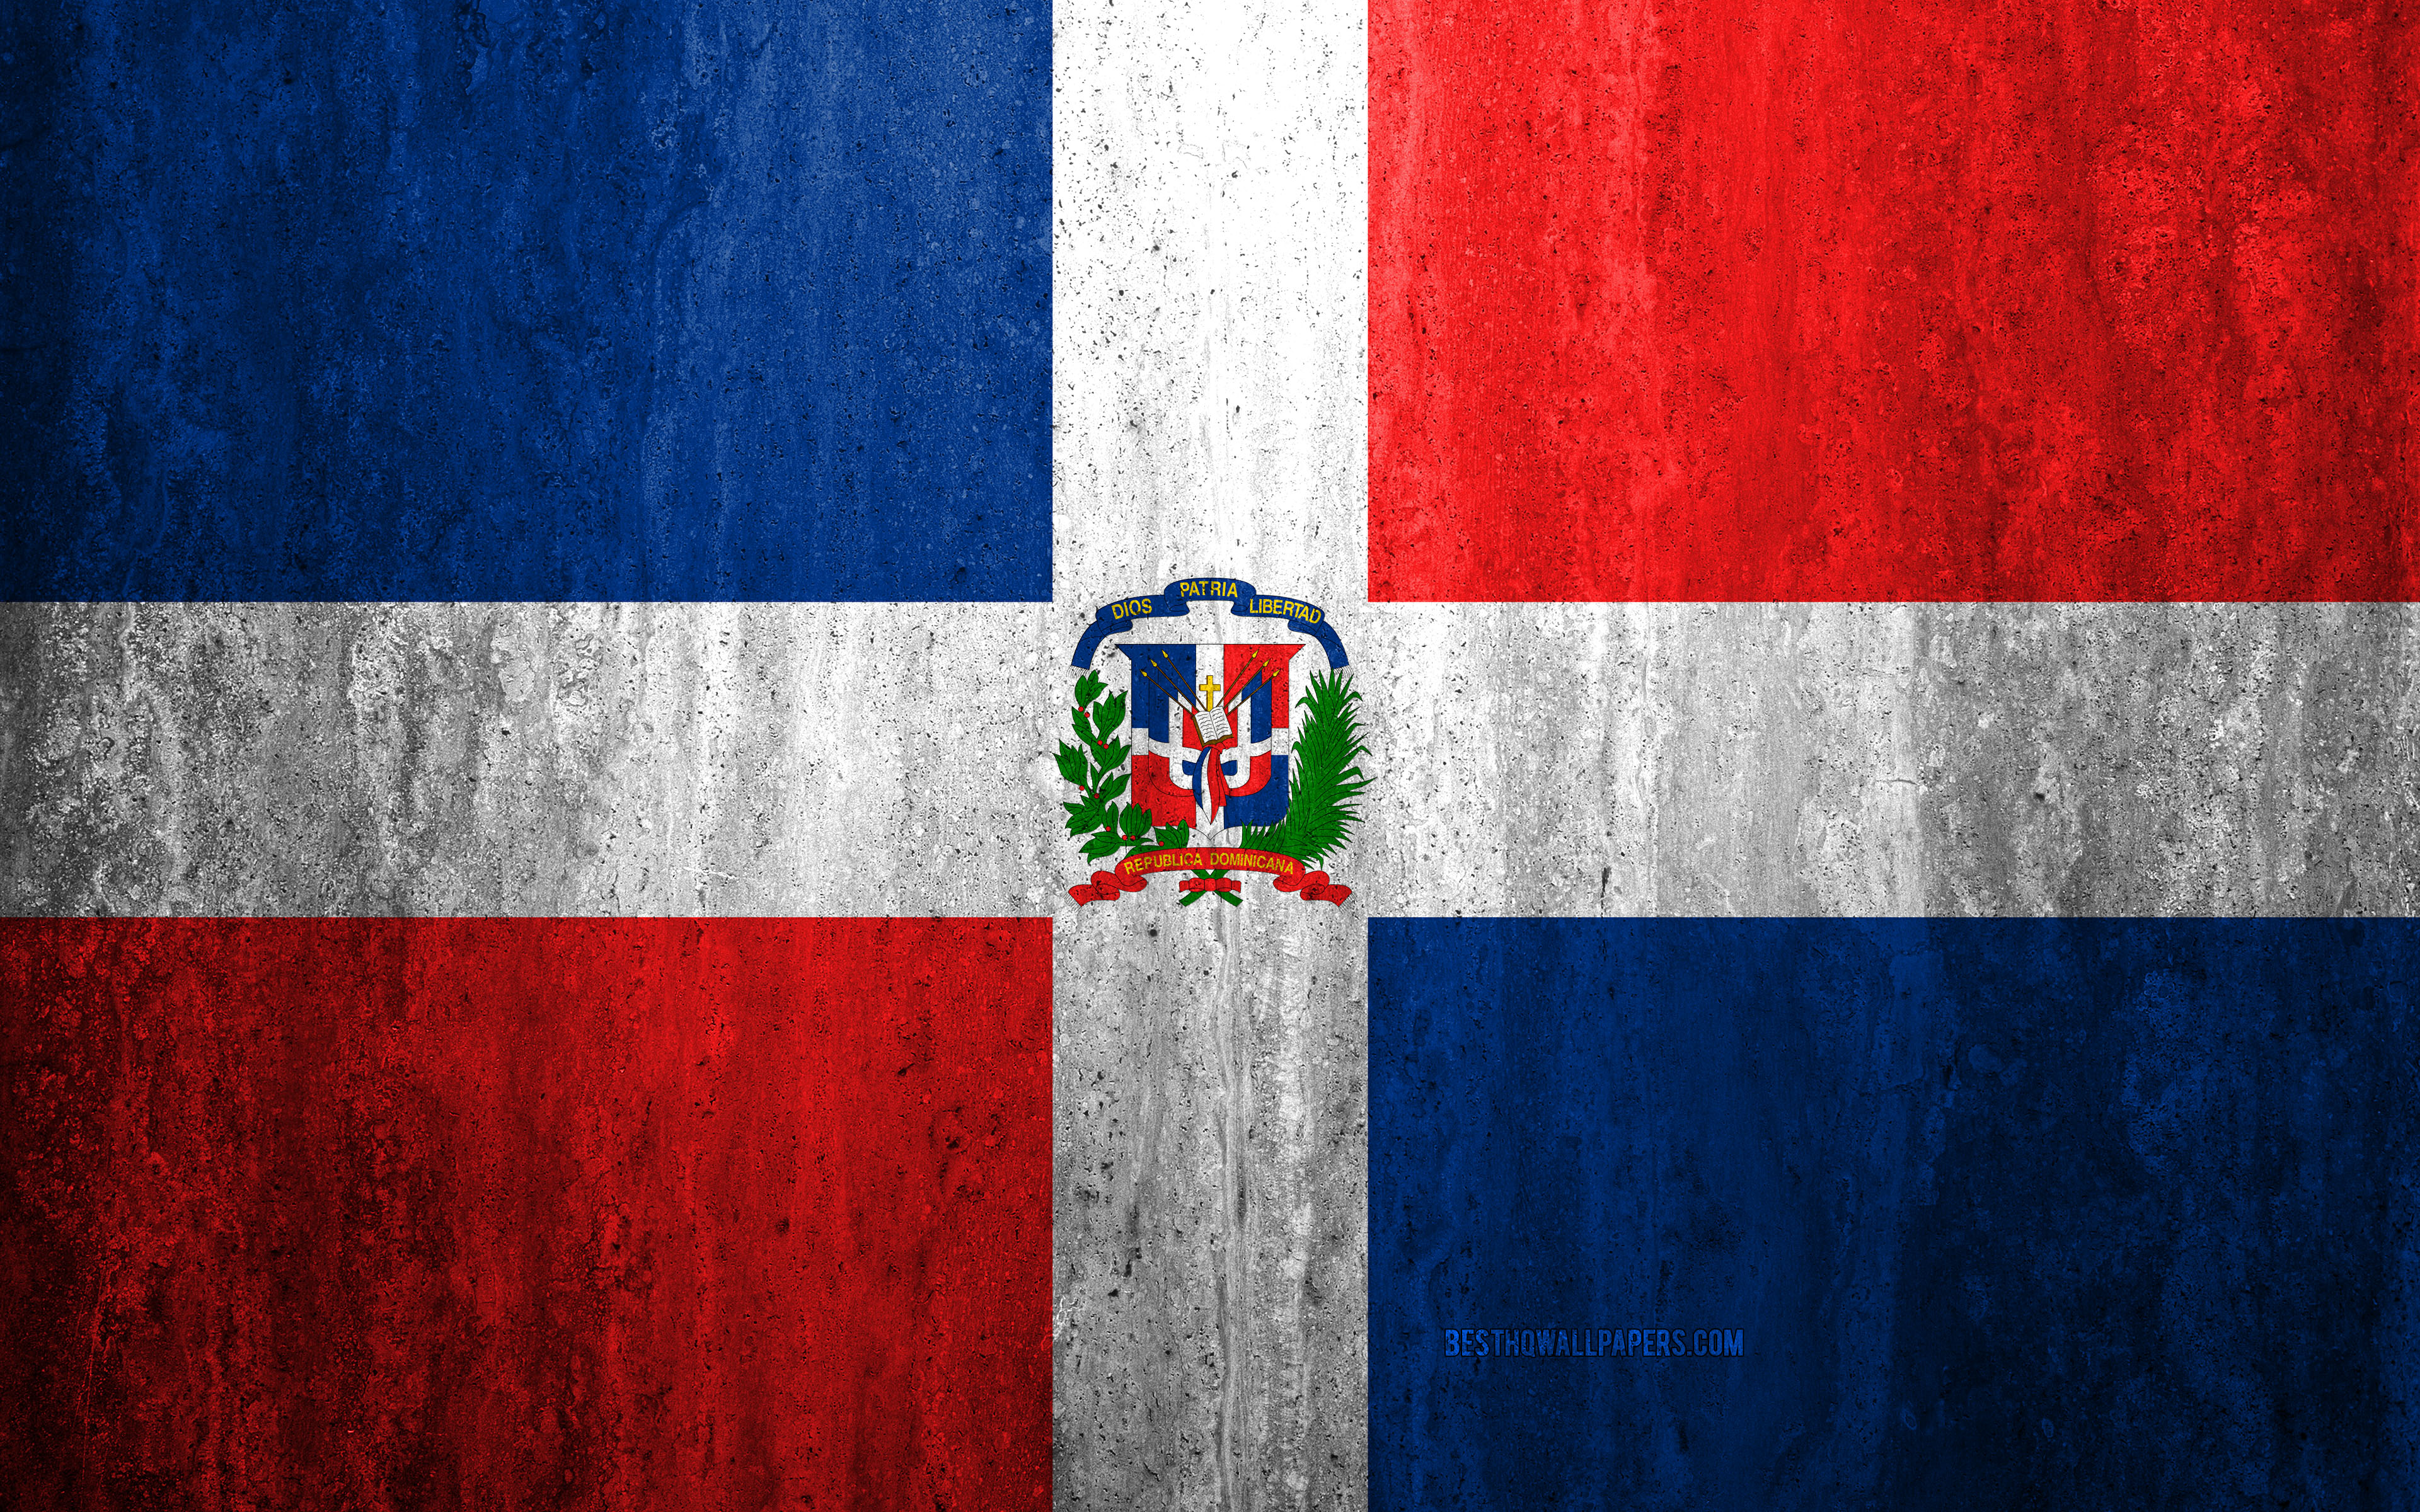 Download wallpaper Flag of Dominican Republic, 4k, stone background, grunge flag, North America, Dominican Republic flag, grunge art, national symbols, Dominican Republic, stone texture for desktop with resolution 3840x2400. High Quality HD